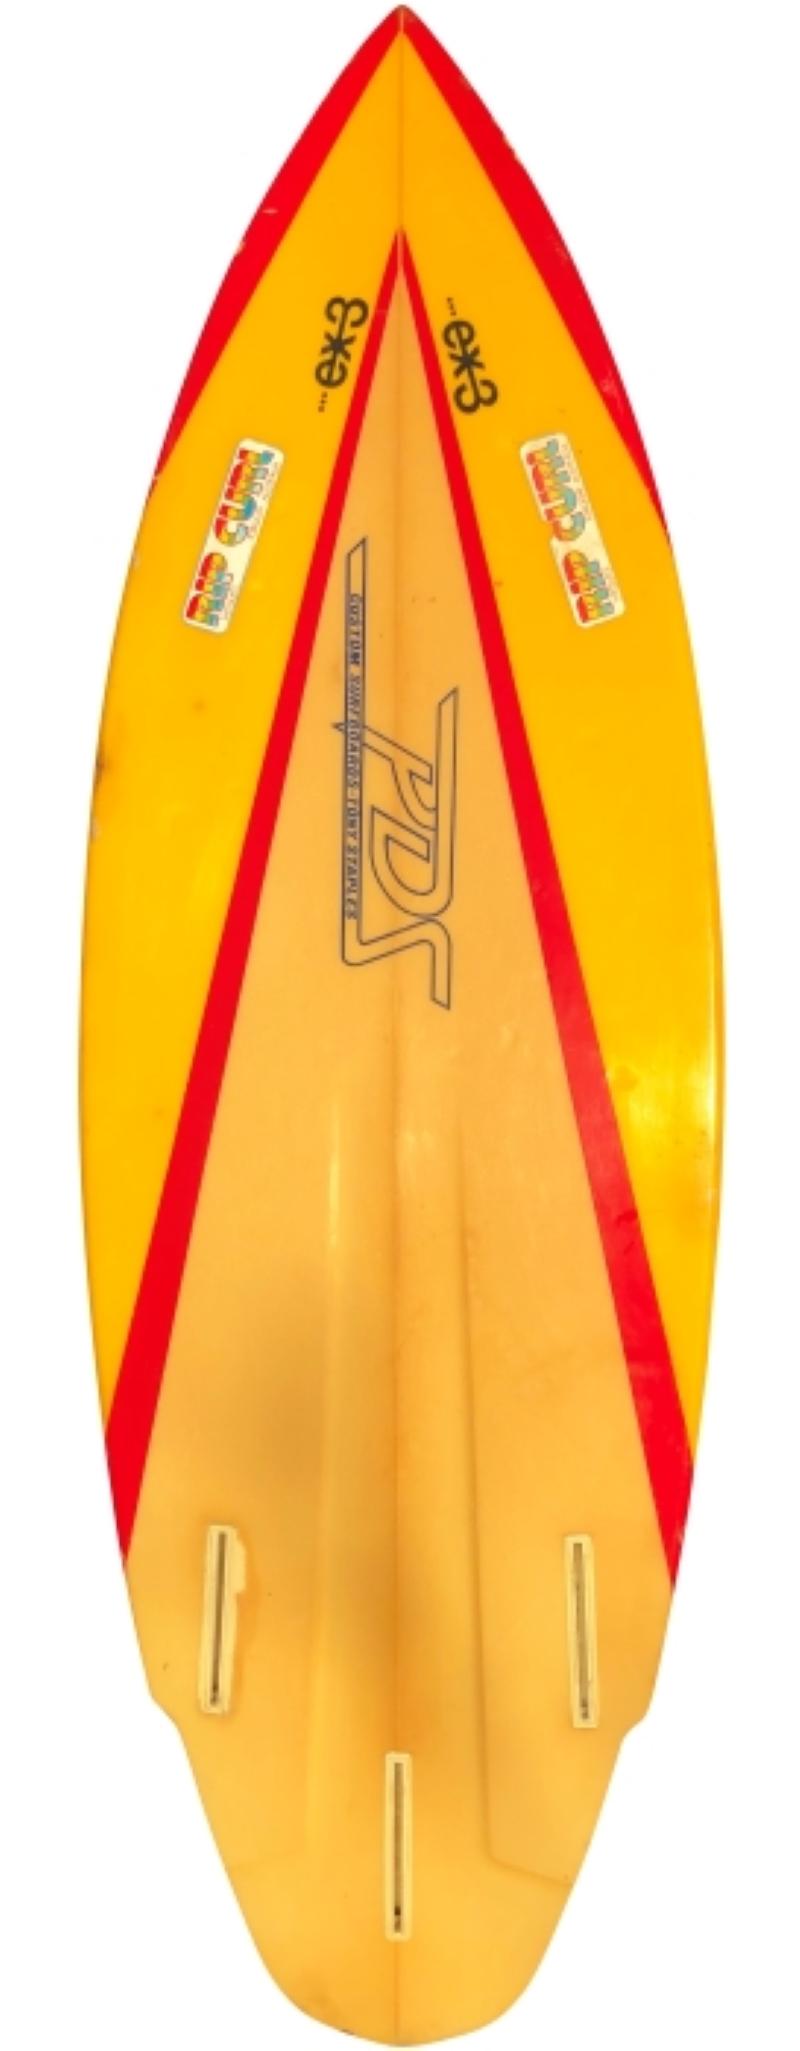 Mid-1980s PDS custom surfboards shortboard shaped by Tony Staples. Features a red/yellow color scheme with winged round tail shape. An affordable example of a 1980s vintage surfboard in all original condition.